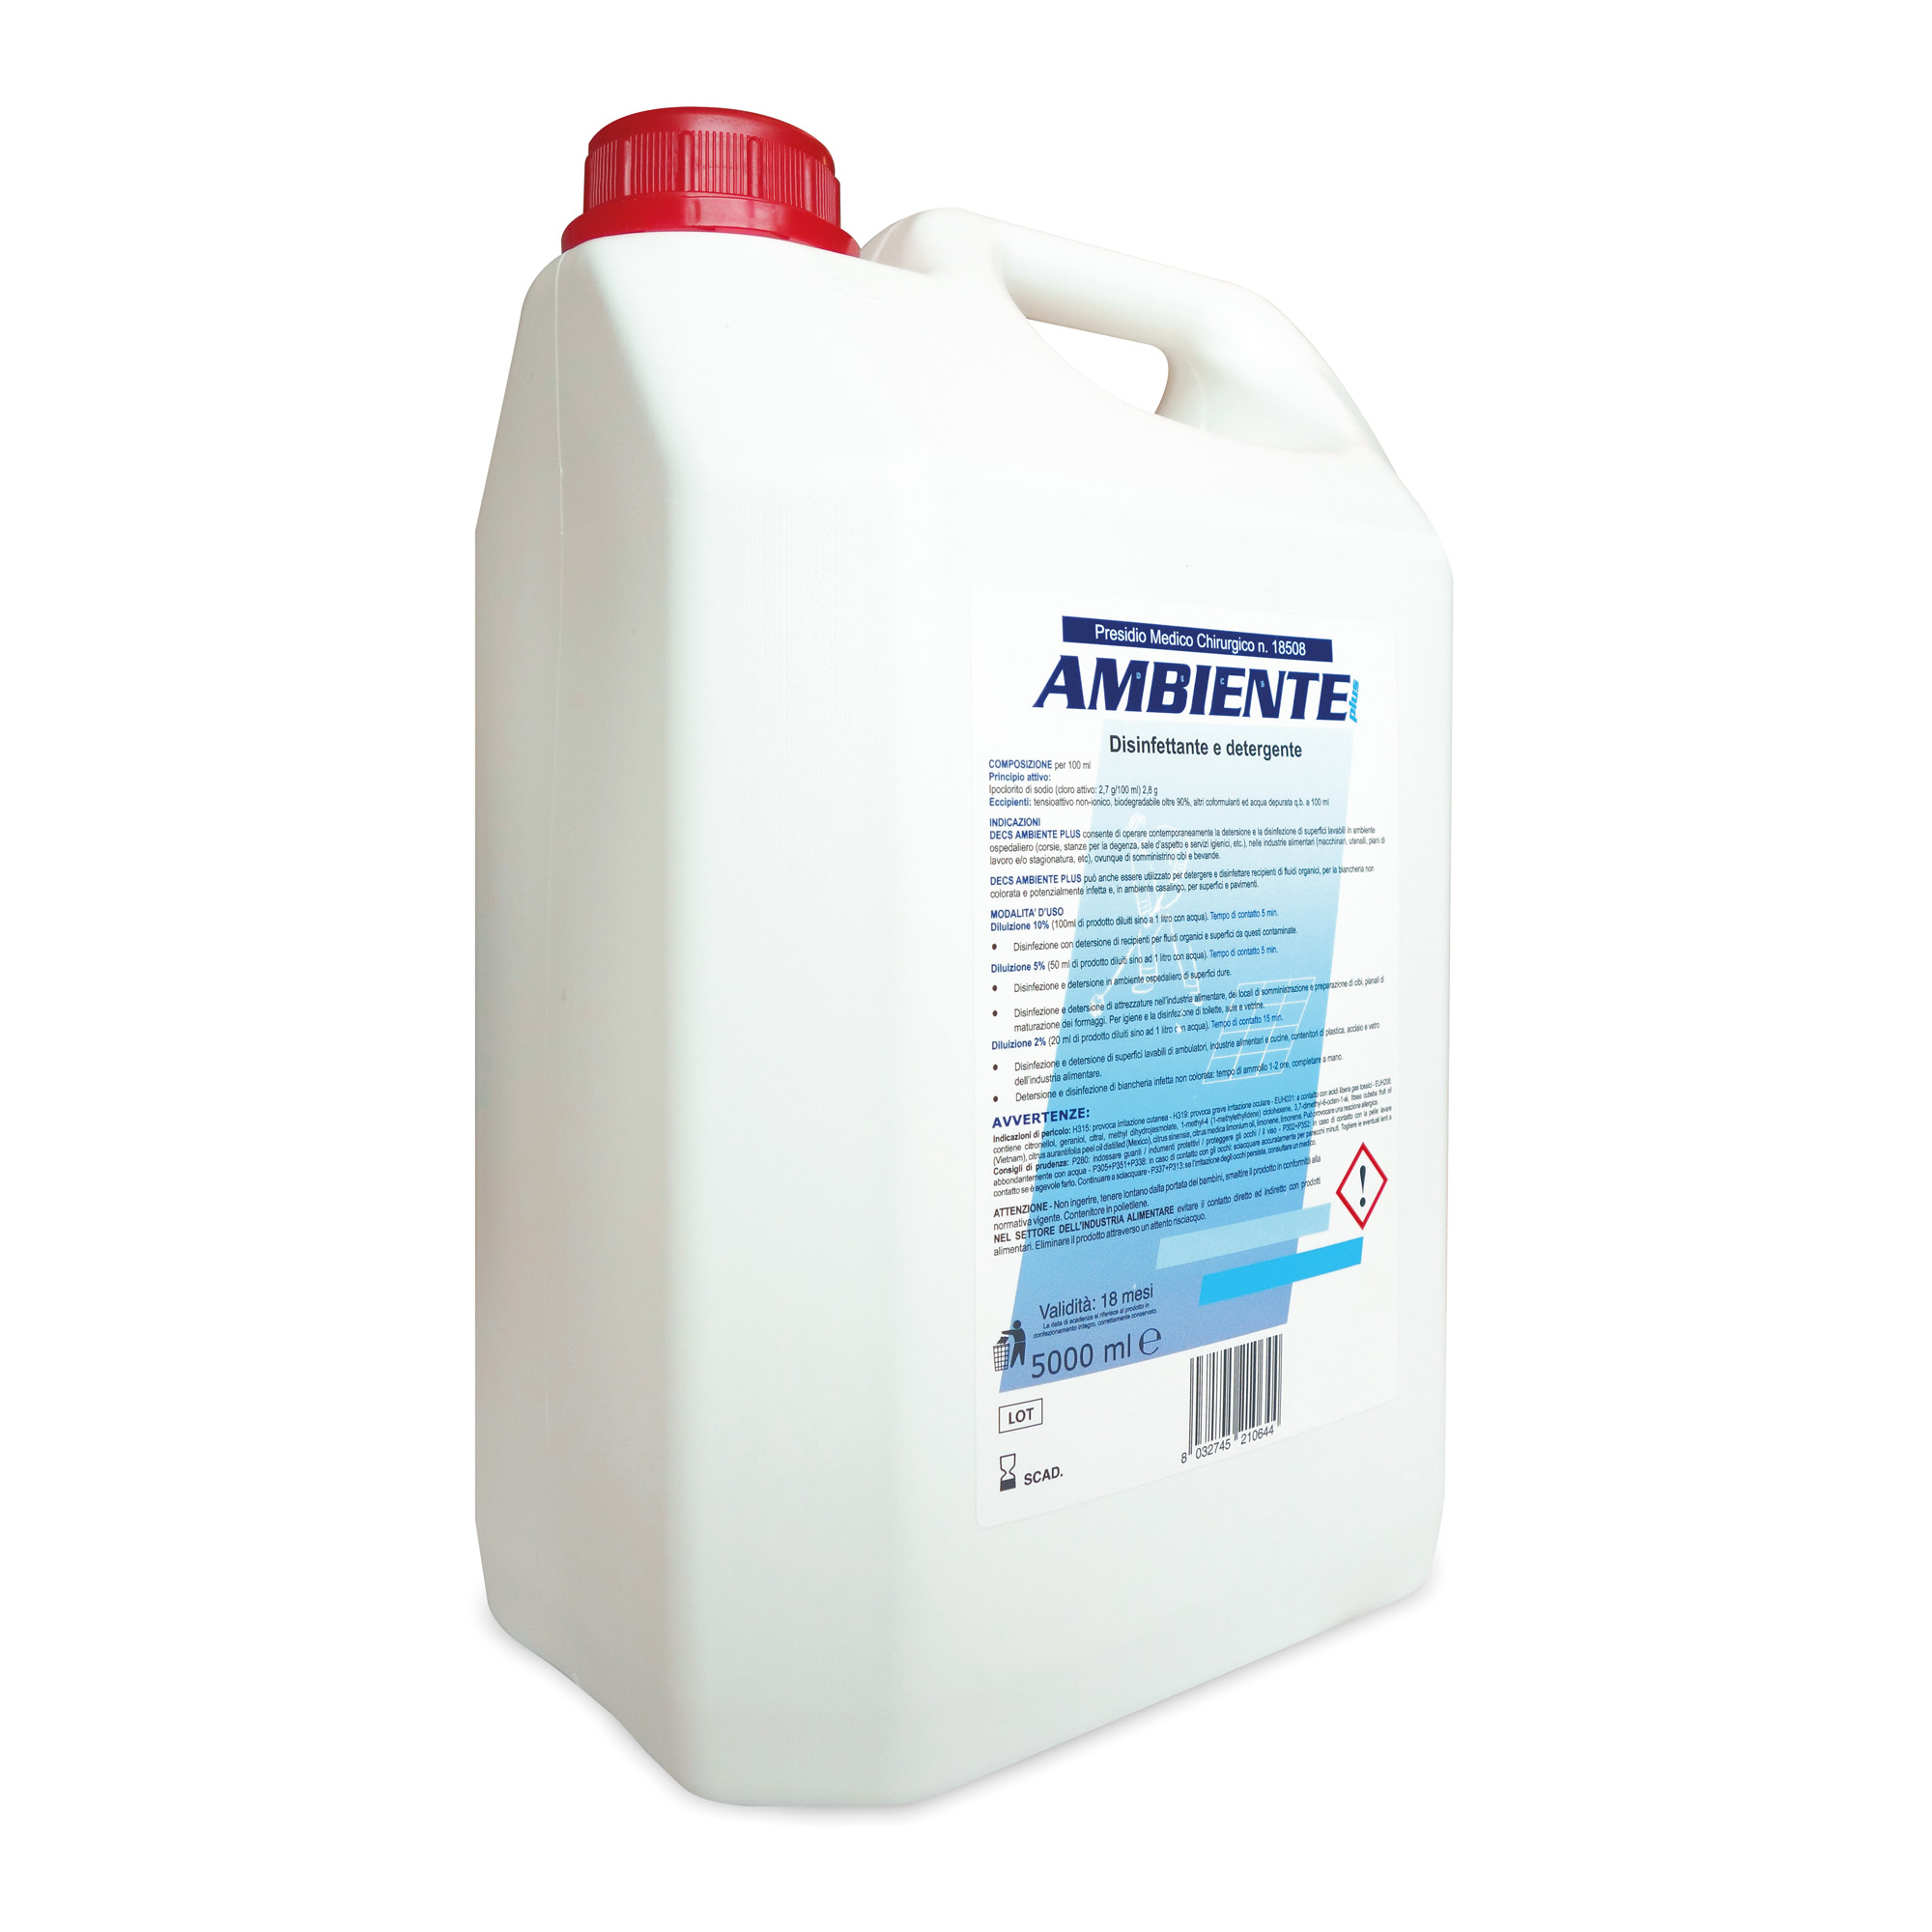 Sodium hypochlorite-based disinfectant for floors, washable surfaces and equipment Decs Ambiente Plus 5 l